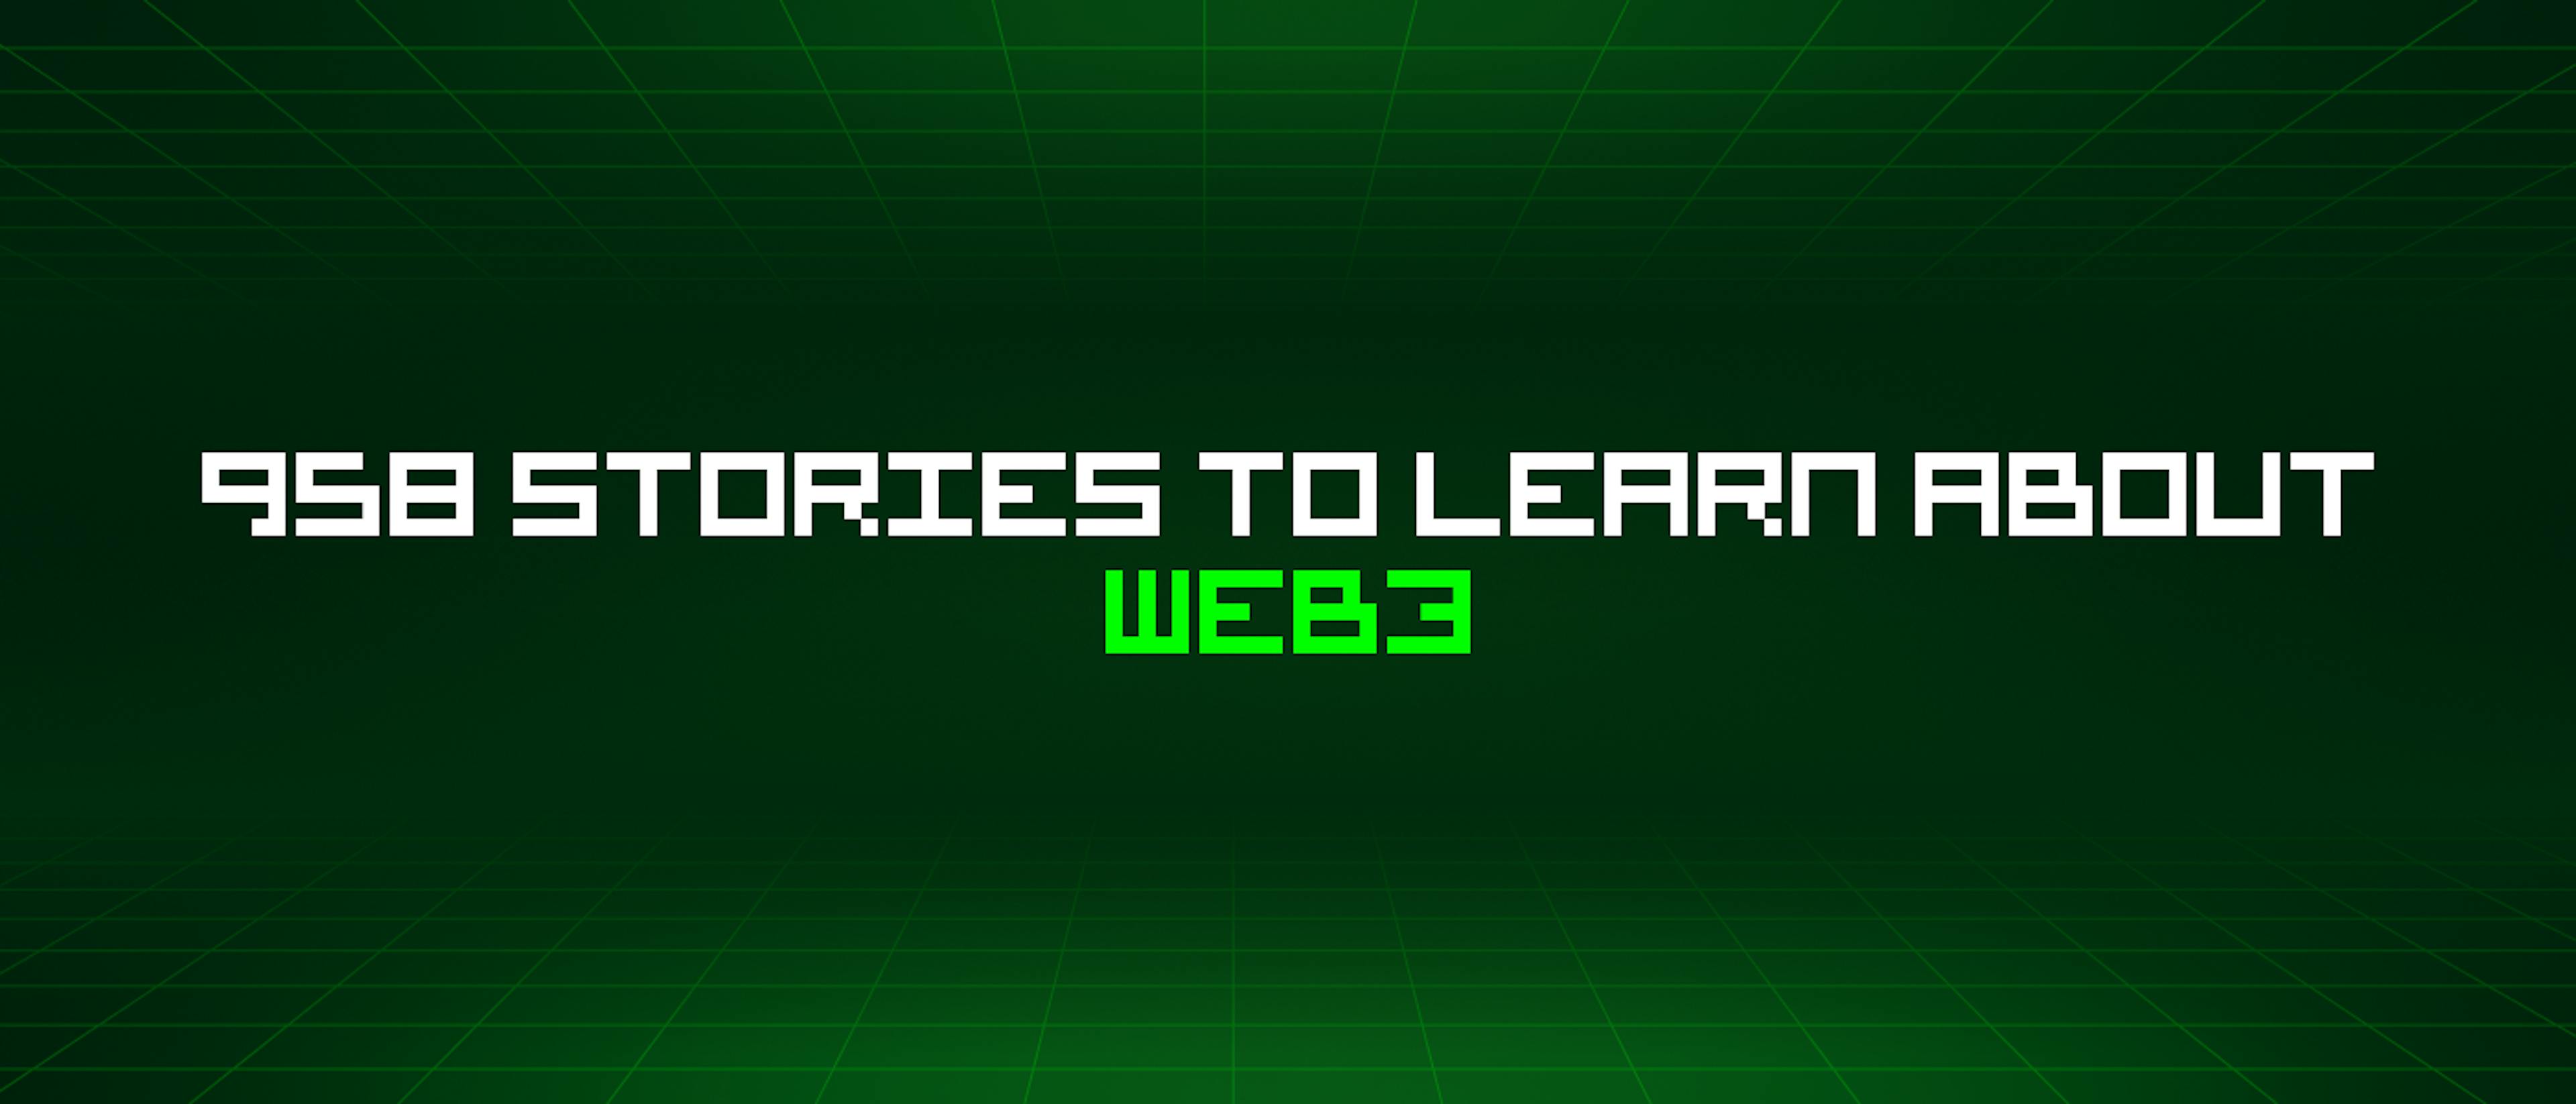 featured image - 958 Stories To Learn About Web3